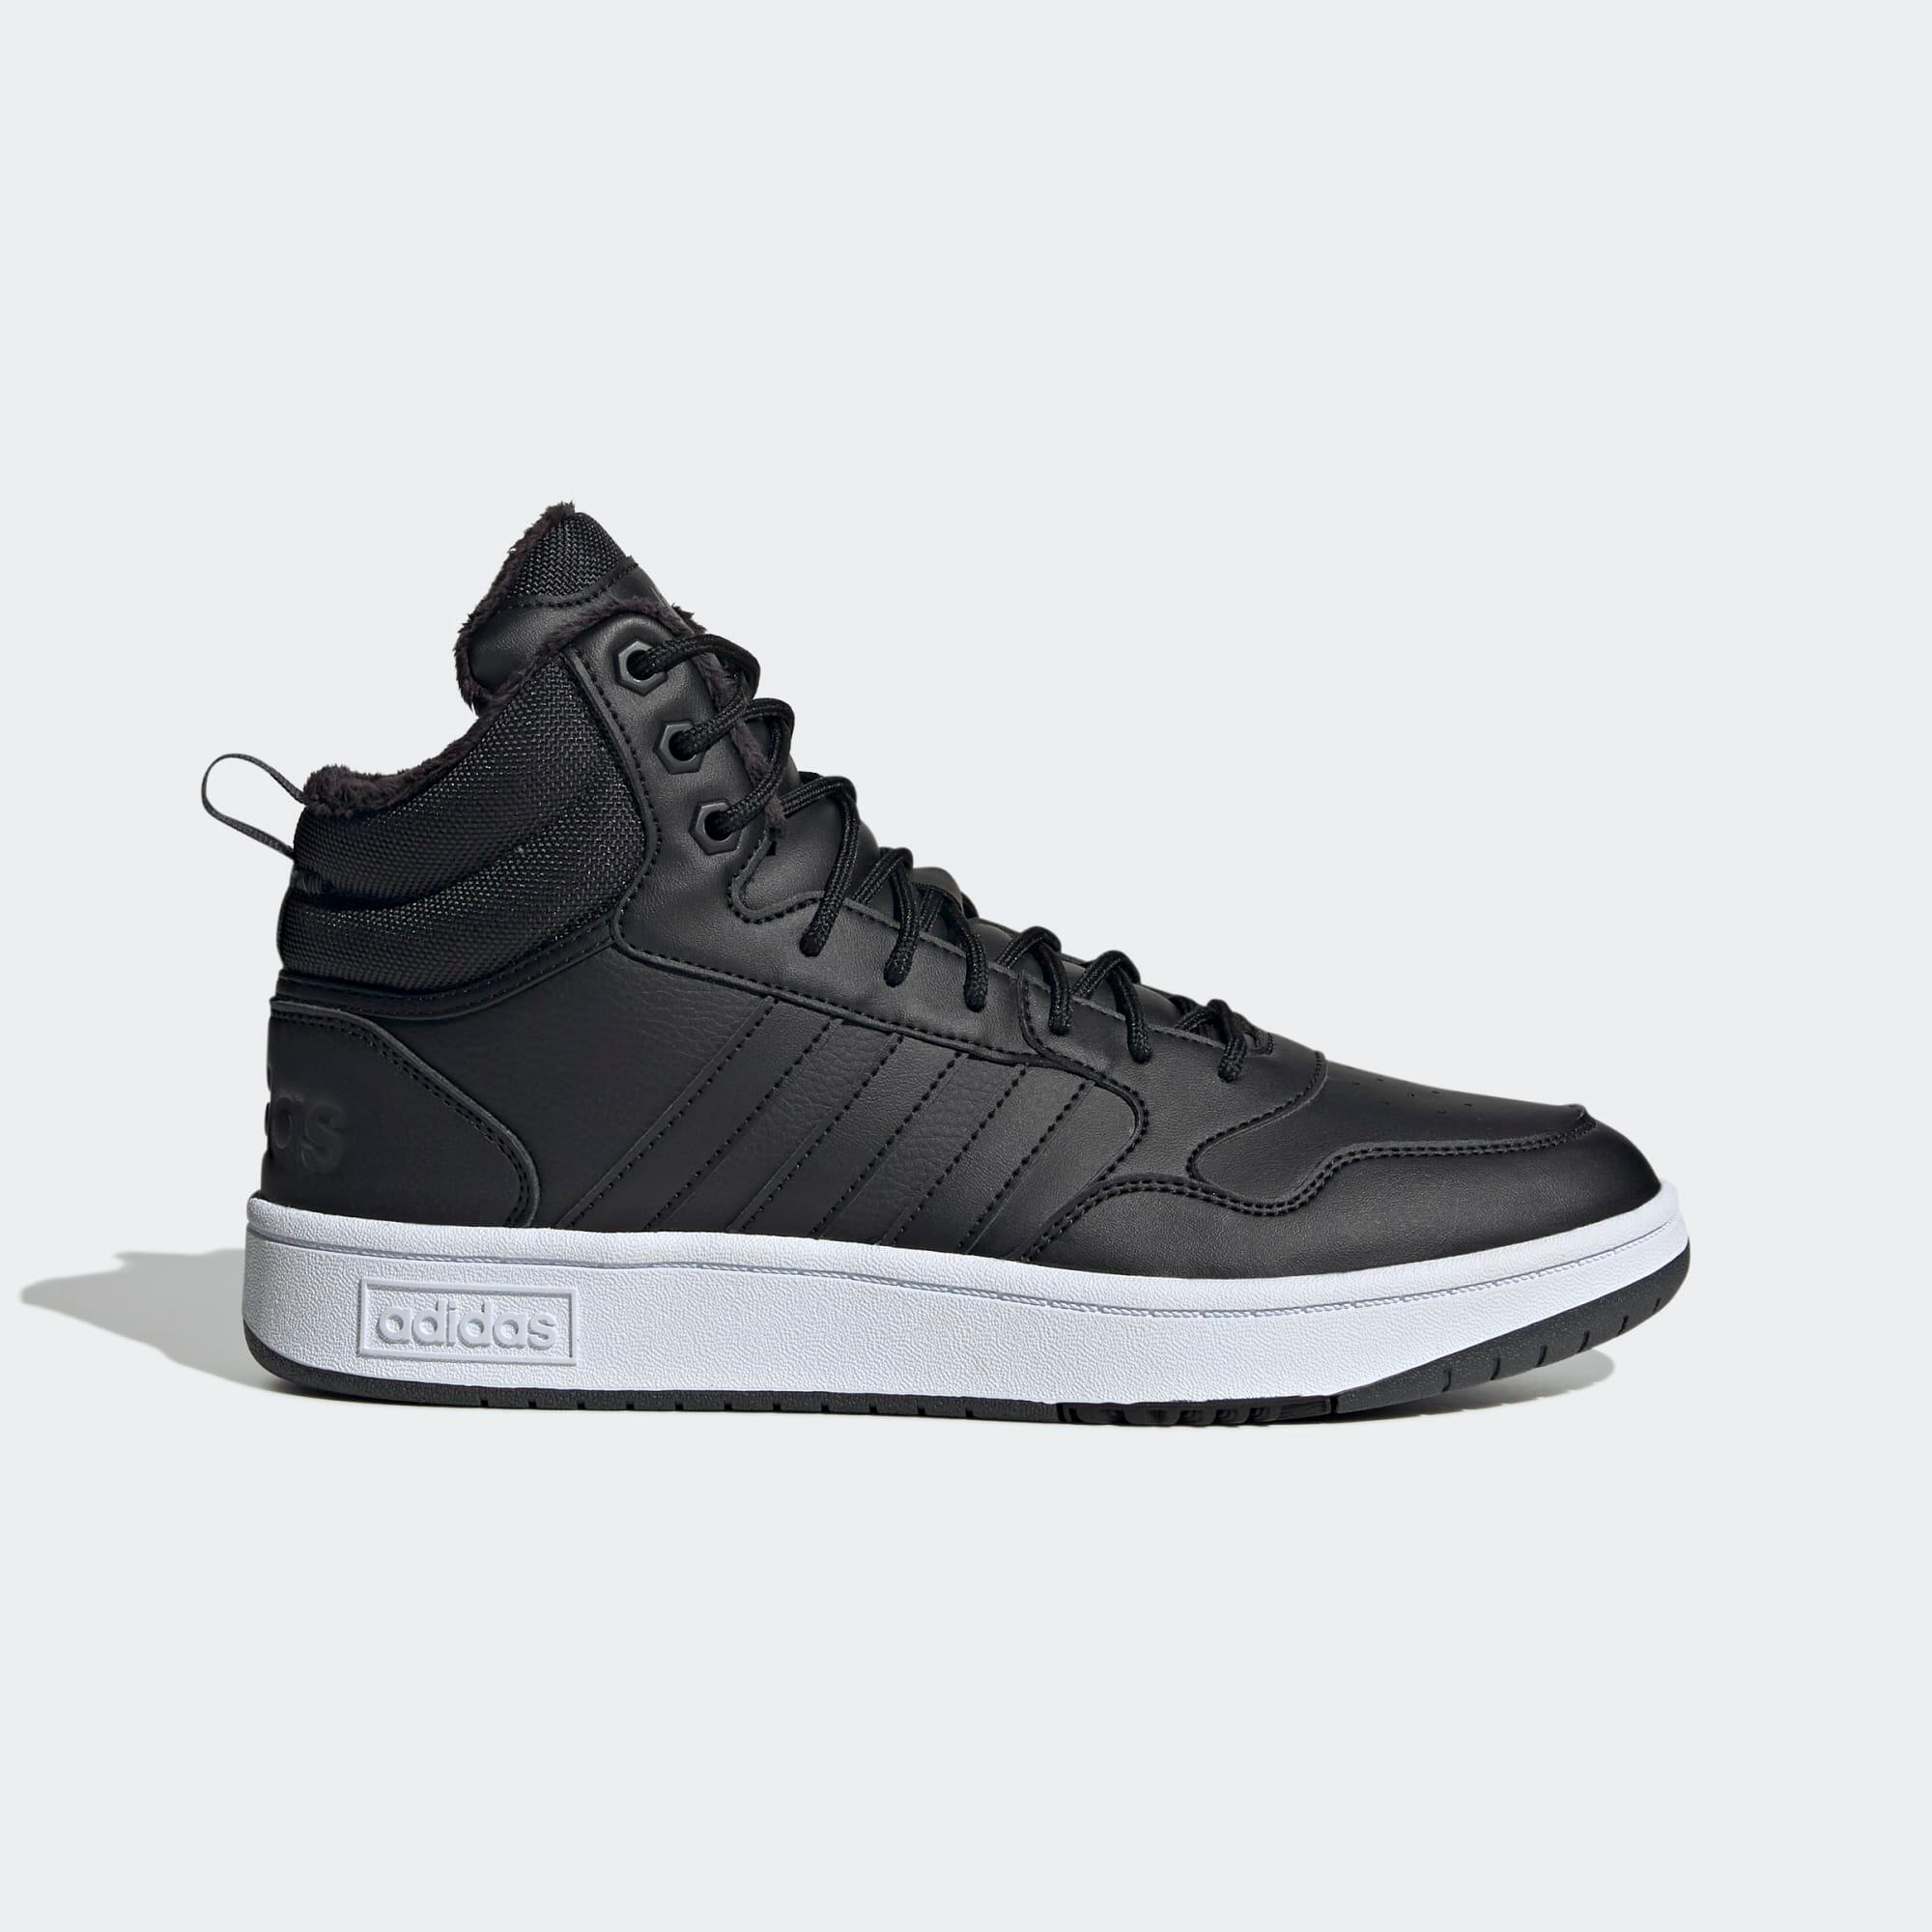 ADIDAS Chaussure Femme Hoops 3.0 Mid Wtr Adidas Noire -